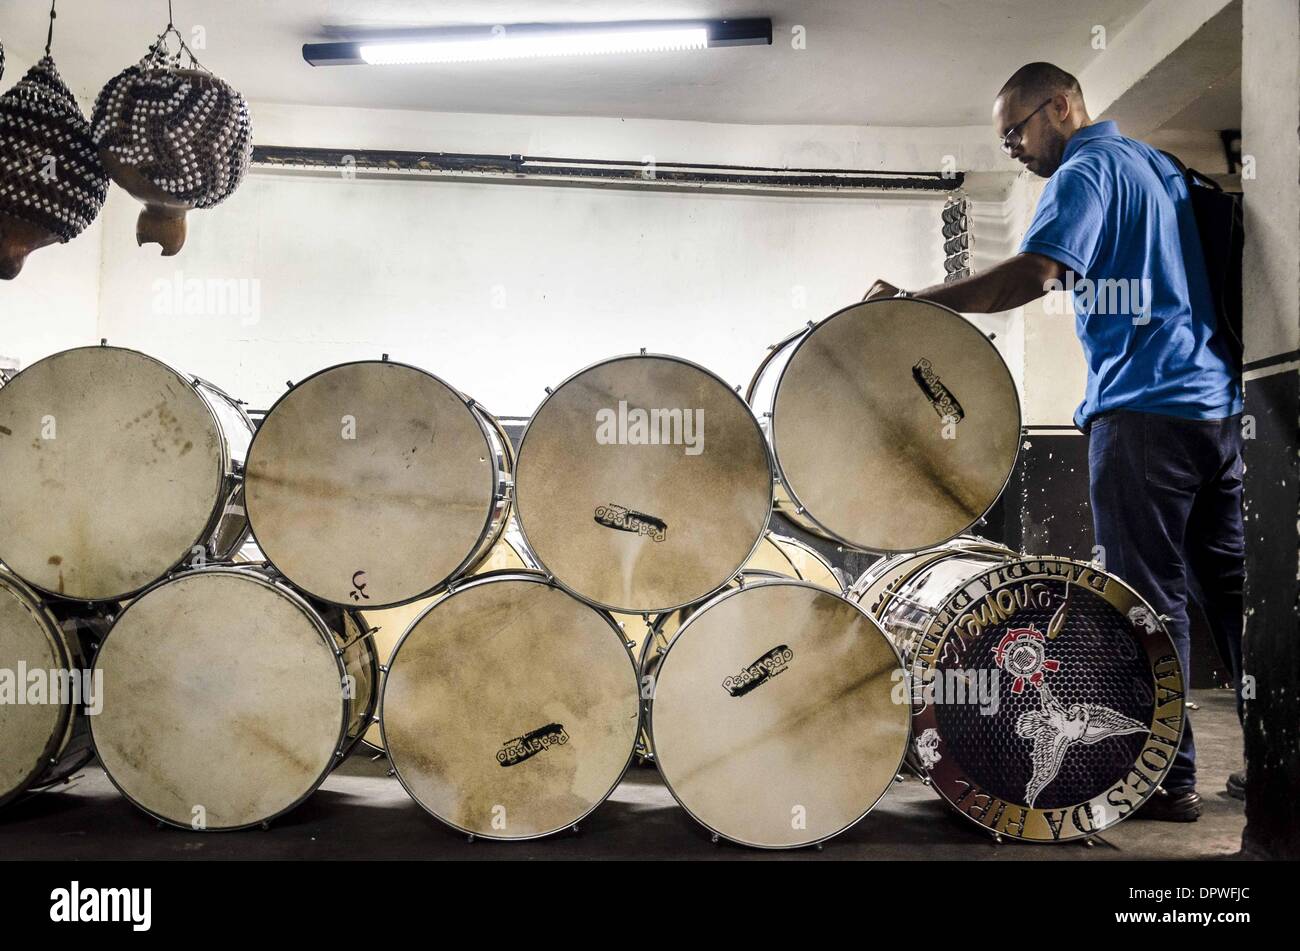 Jan. 14, 2014 - Sao Paulo, Sao Paulo, Brazil - Members of the ''Escola de Samba'' ''Gavioes da Fiel'' rehearse at their court, in central Sao Paulo, this tuesday - 14/01/2014. Supported by the biggest organized group fans, of the football club Corinthians, Gavioes has won the Carnaval title four times. ''Escolas de Samba'' are like teams, and spent one whole year getting prepared for one year for 1h of parade on Carnival, competing for the title of the best one. Sao Paulo's carnival is the second biggest in Brasil, after Rio's. (Credit Image: © Gustavo Basso/NurPhoto/ZUMAPRESS.com) Stock Photo